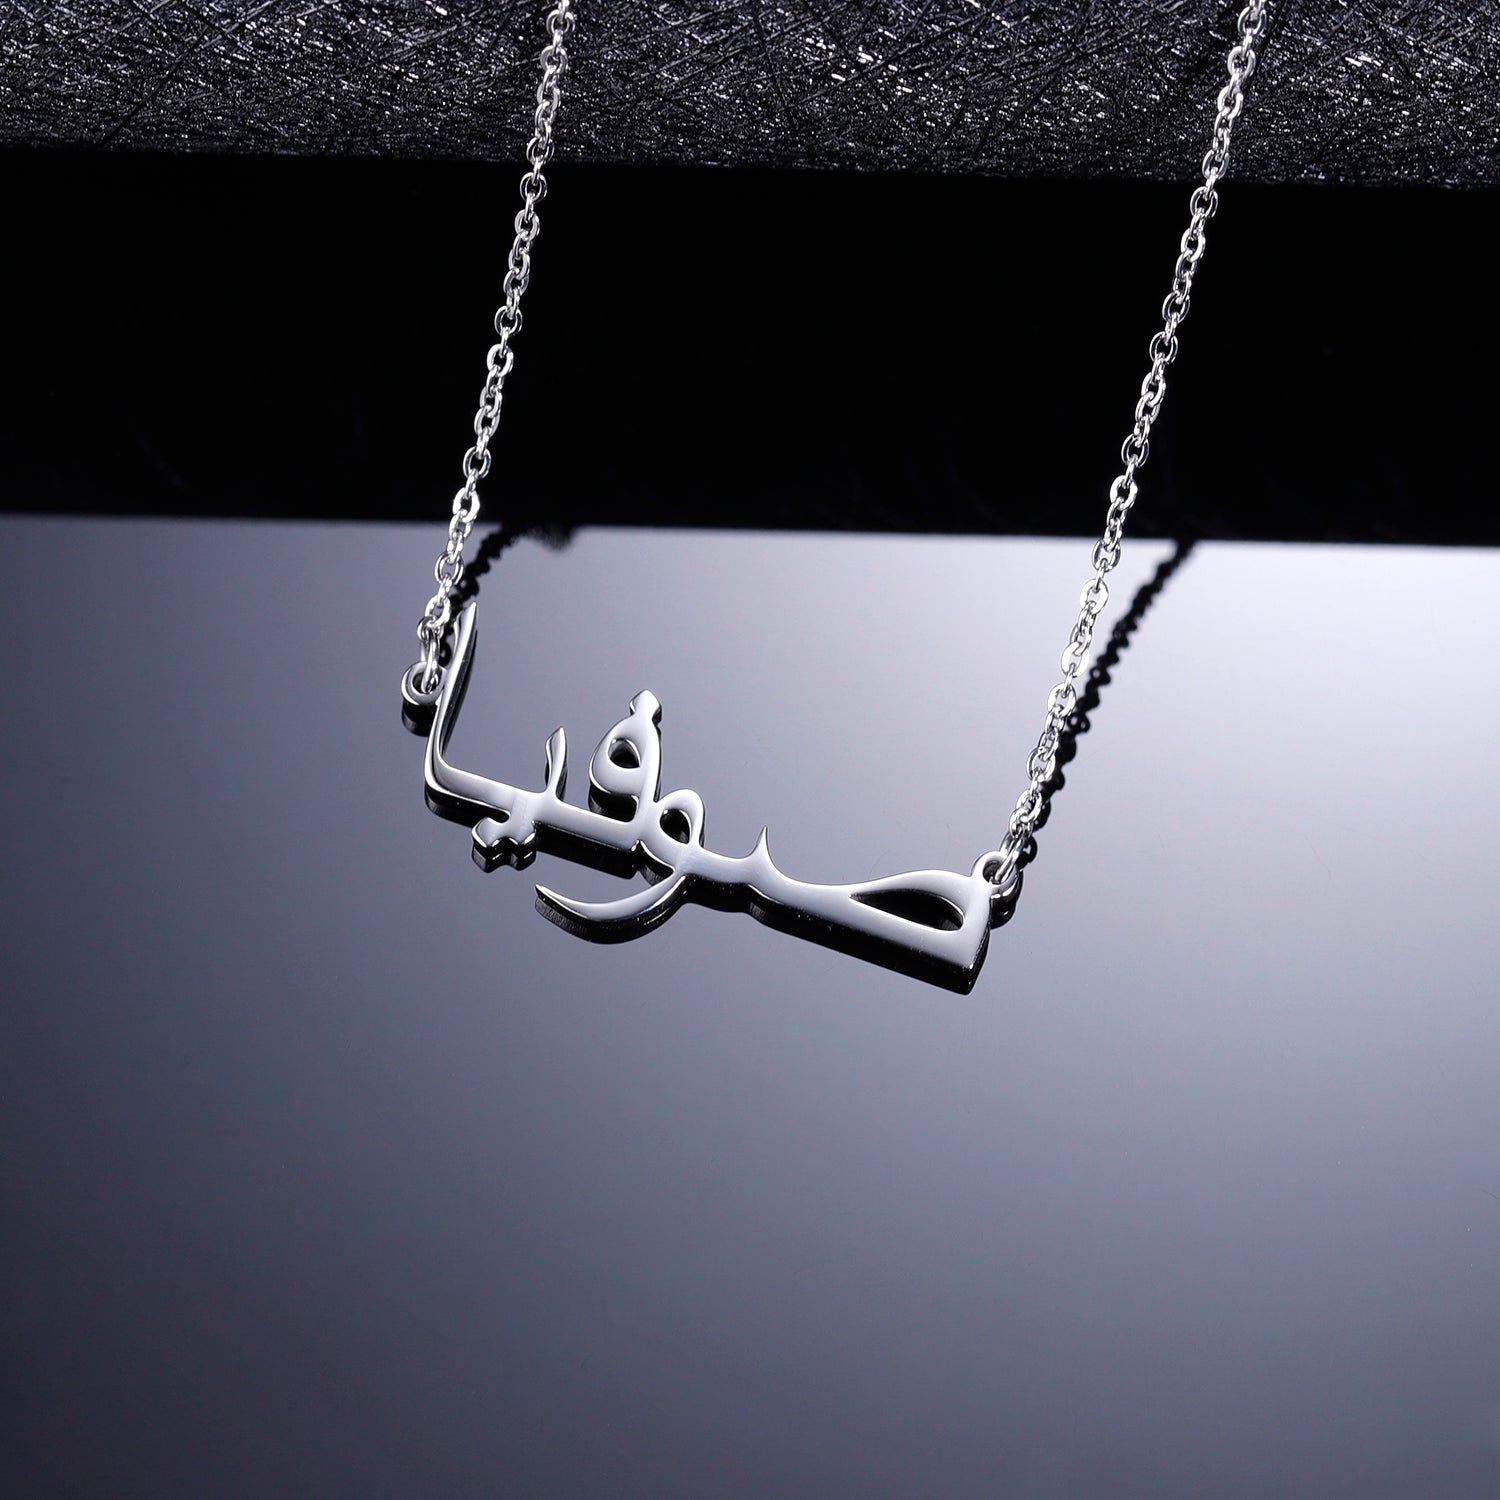 Kids Arabic Name Necklace